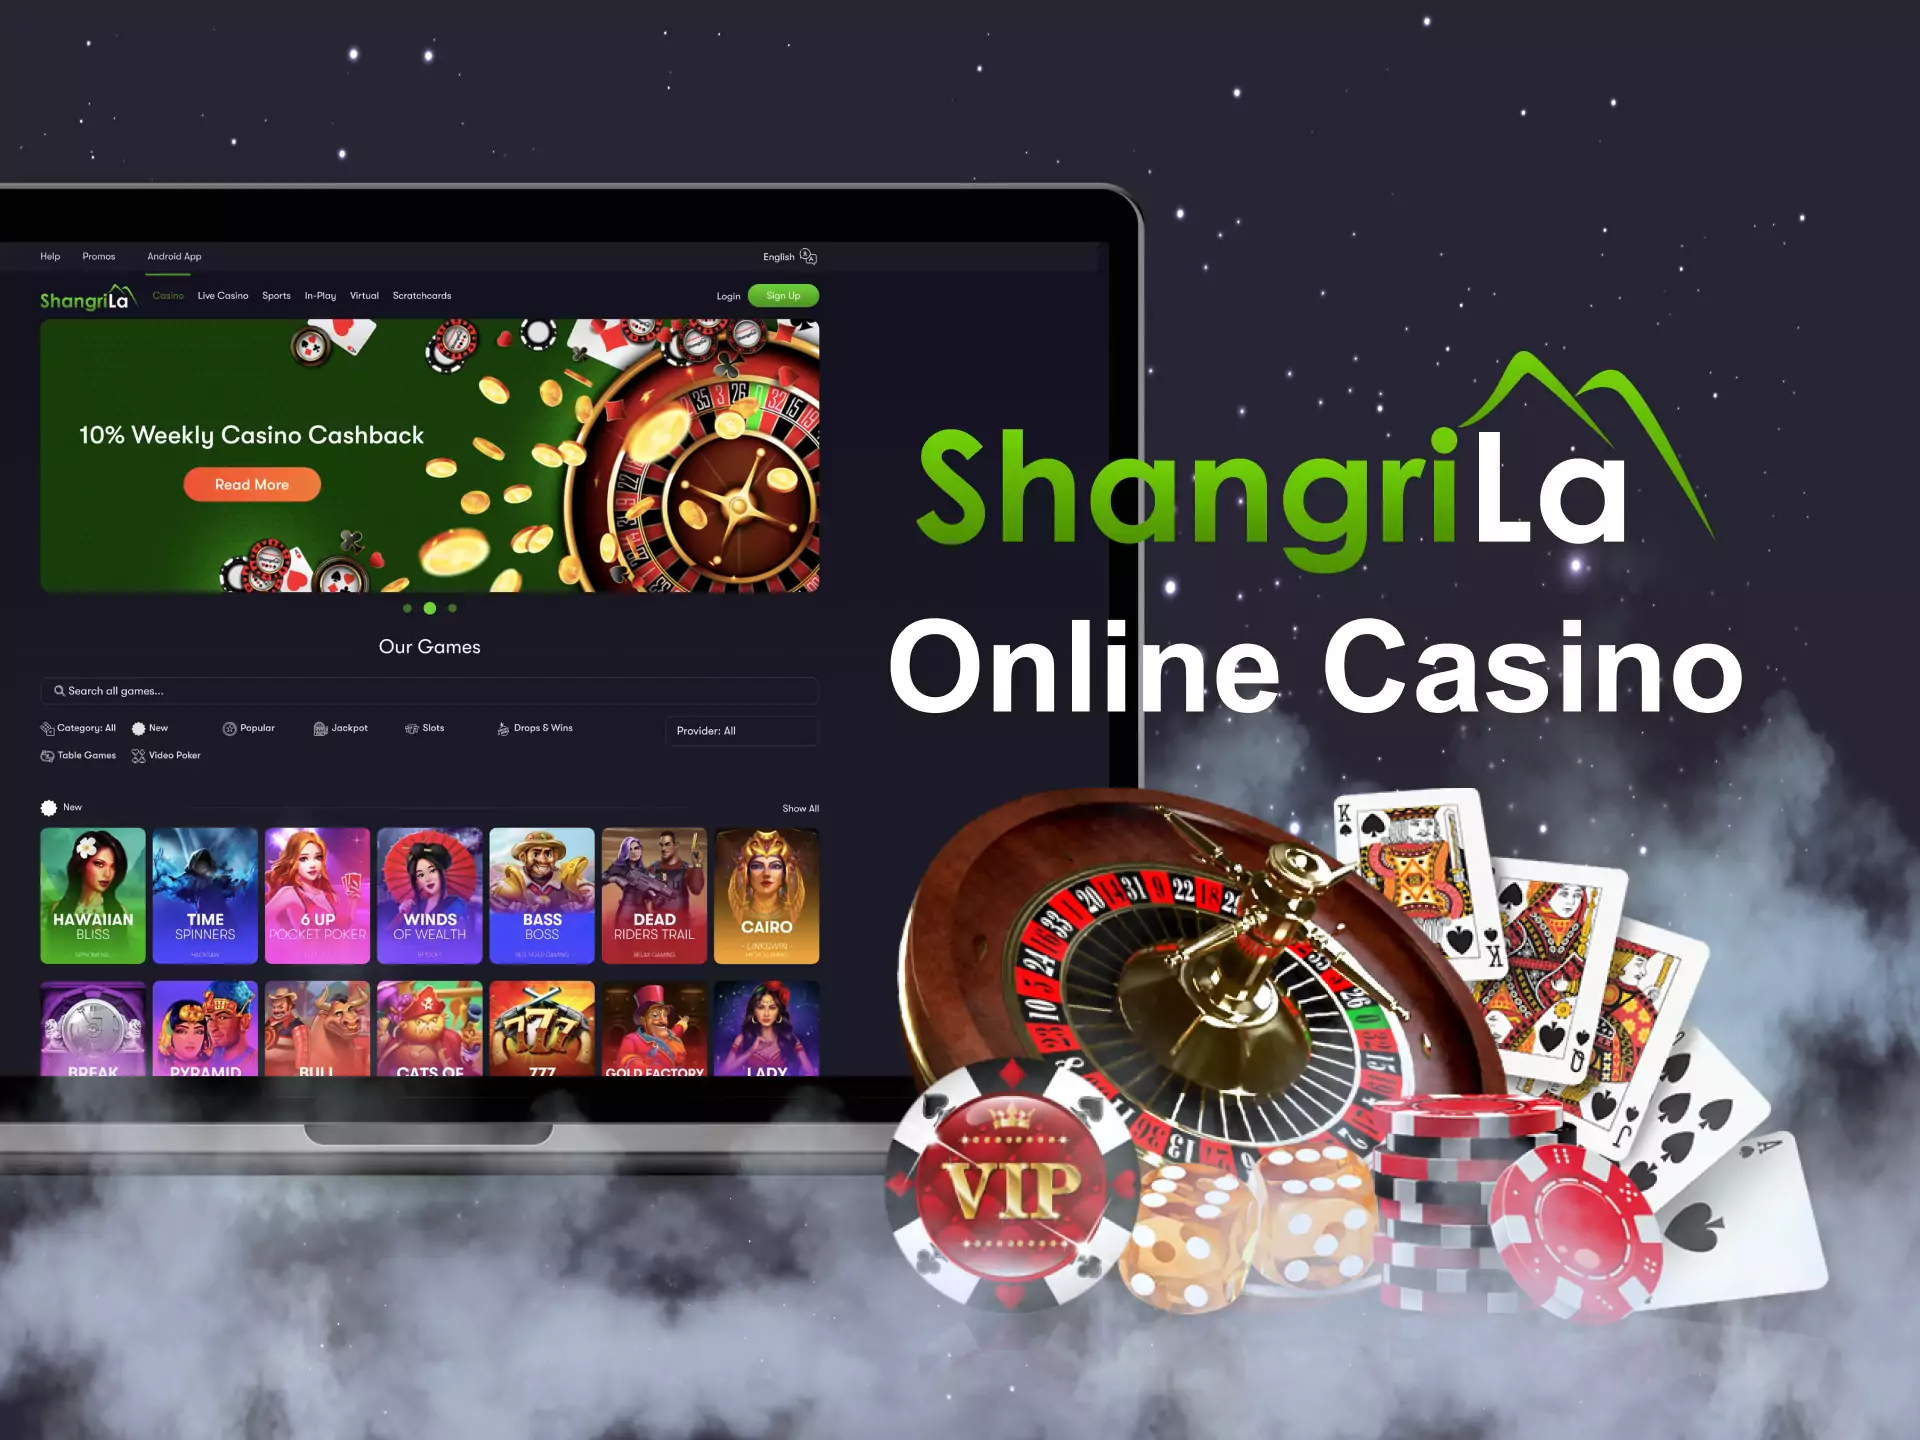 Shangri La Online Casino includes slots and table games.